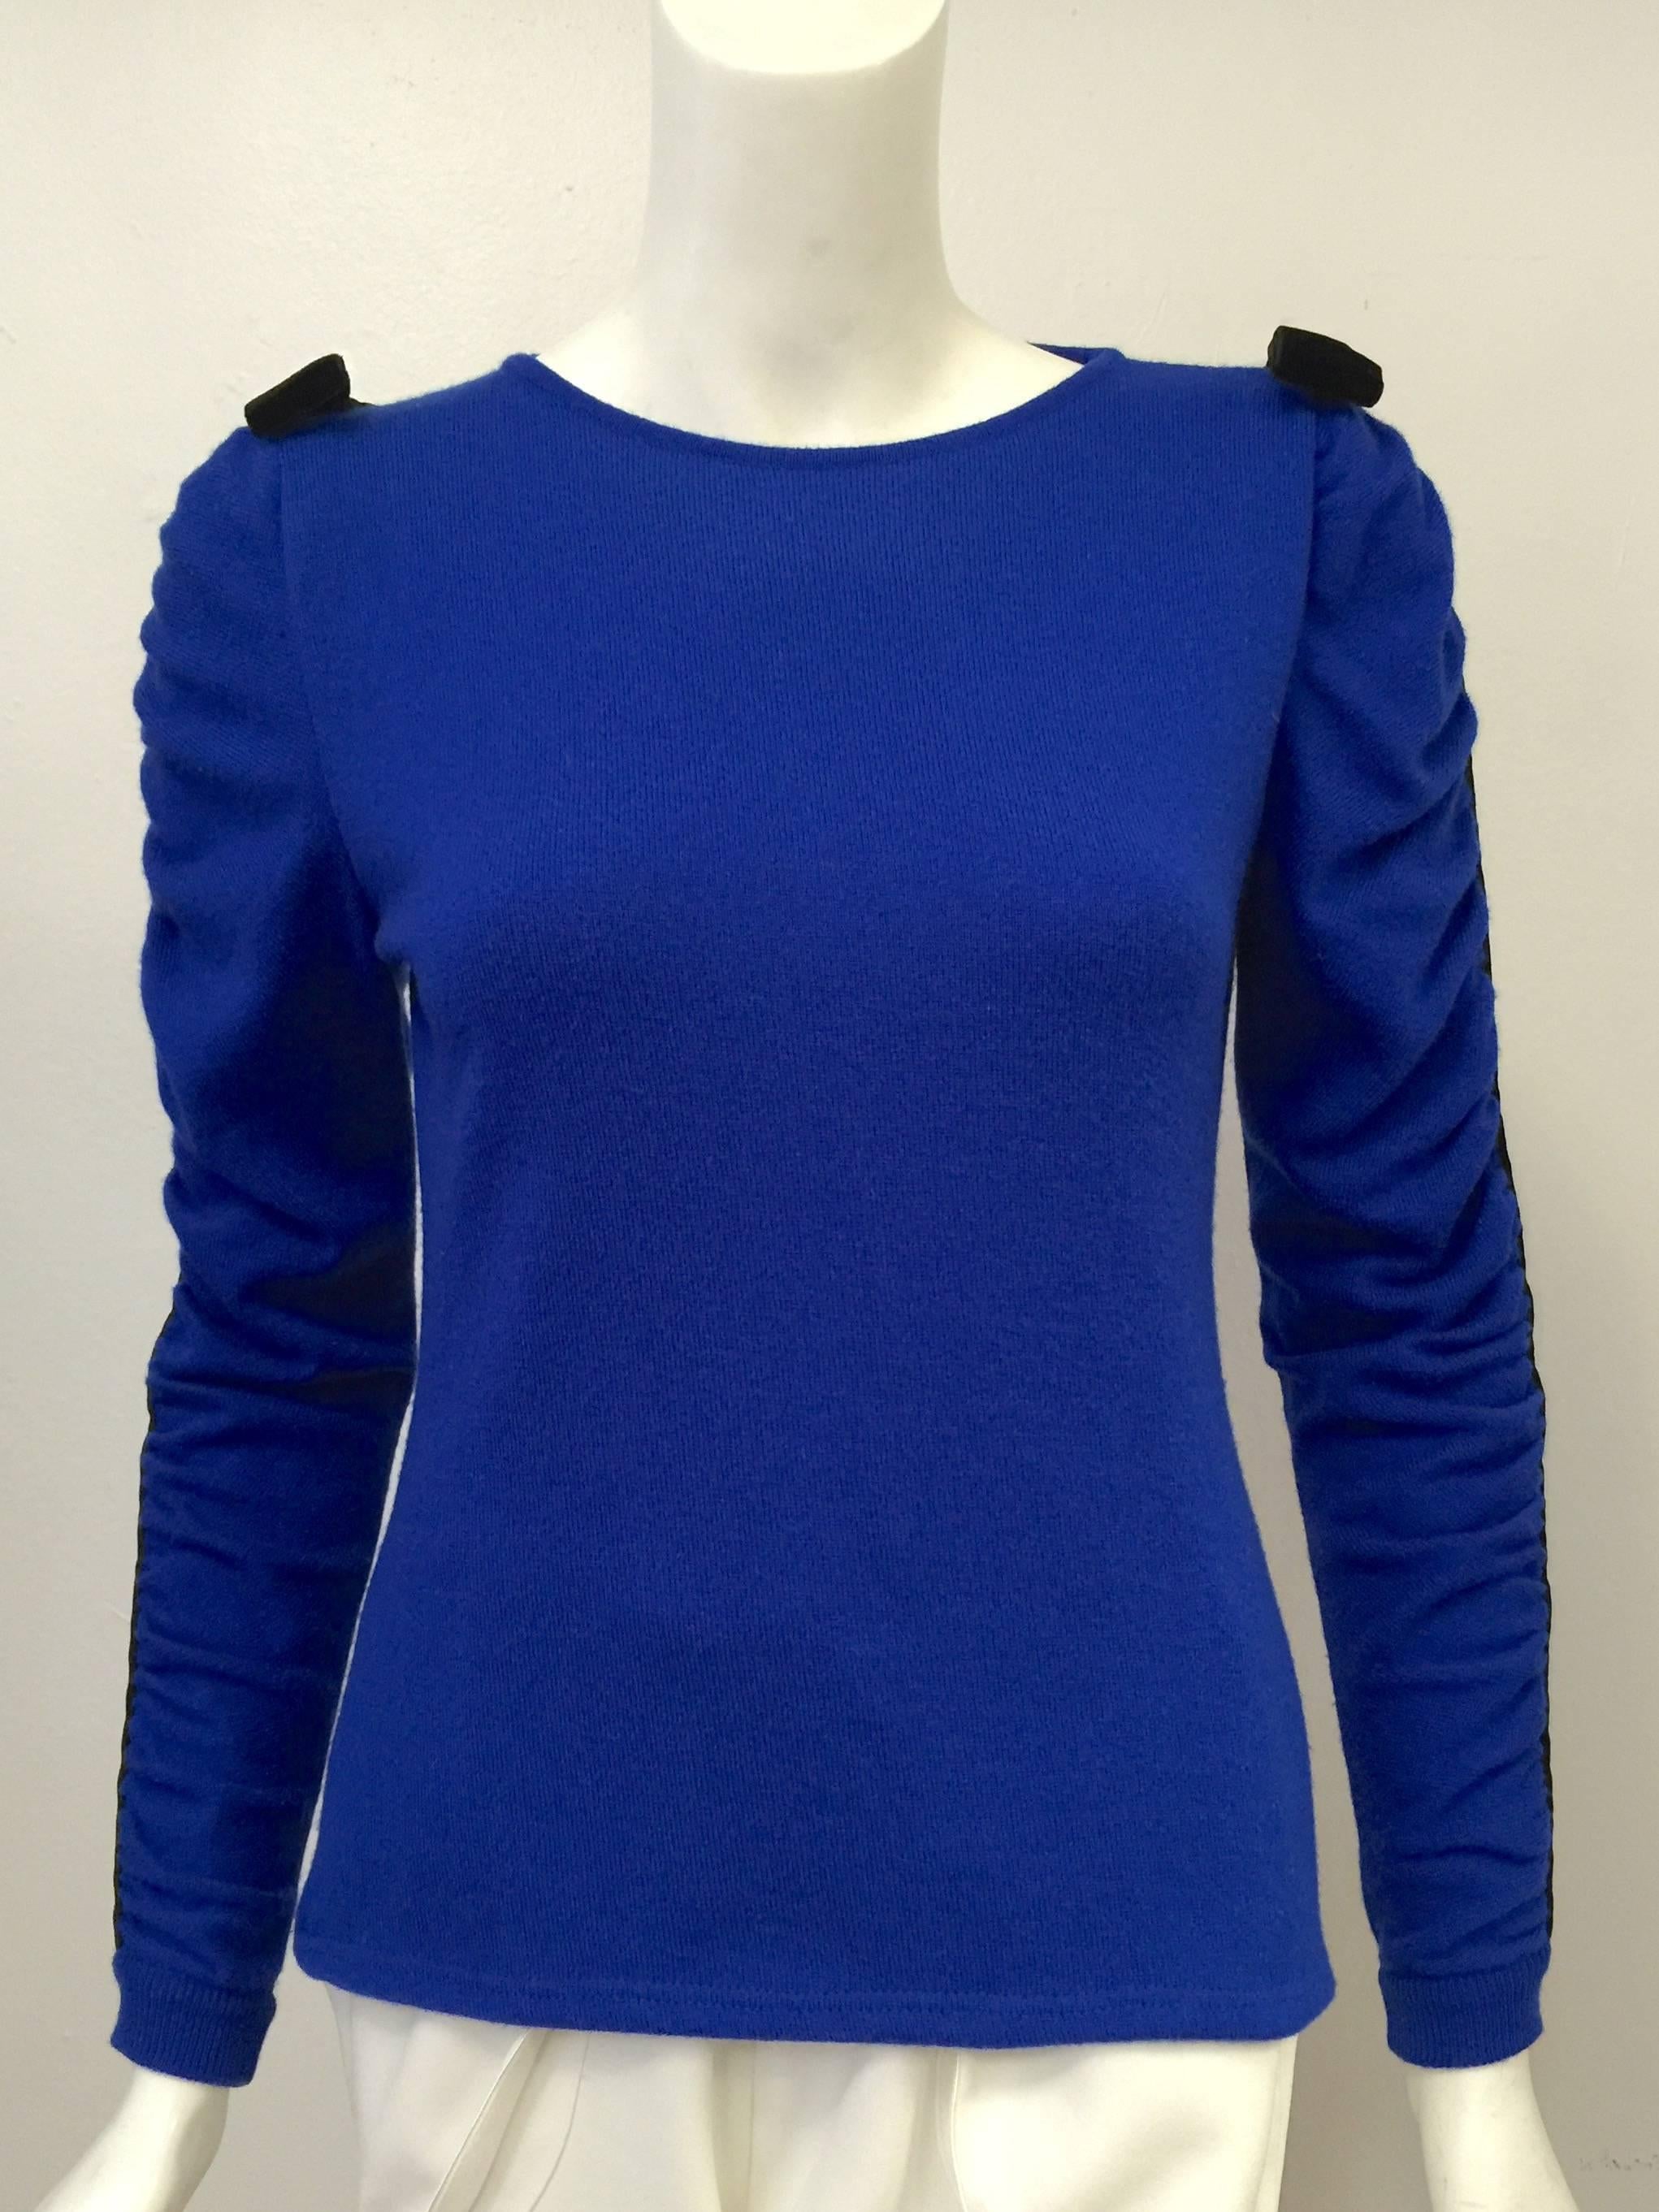 Valentino Boutique Royal Blue Pullover is typical Valentino Garavani...classic, feminine, and luxurious!  Features fine wool in a glorious shade of royal blue, round neck, and long sleeves.  With a nod to Valentino's couture house, sleeves have been